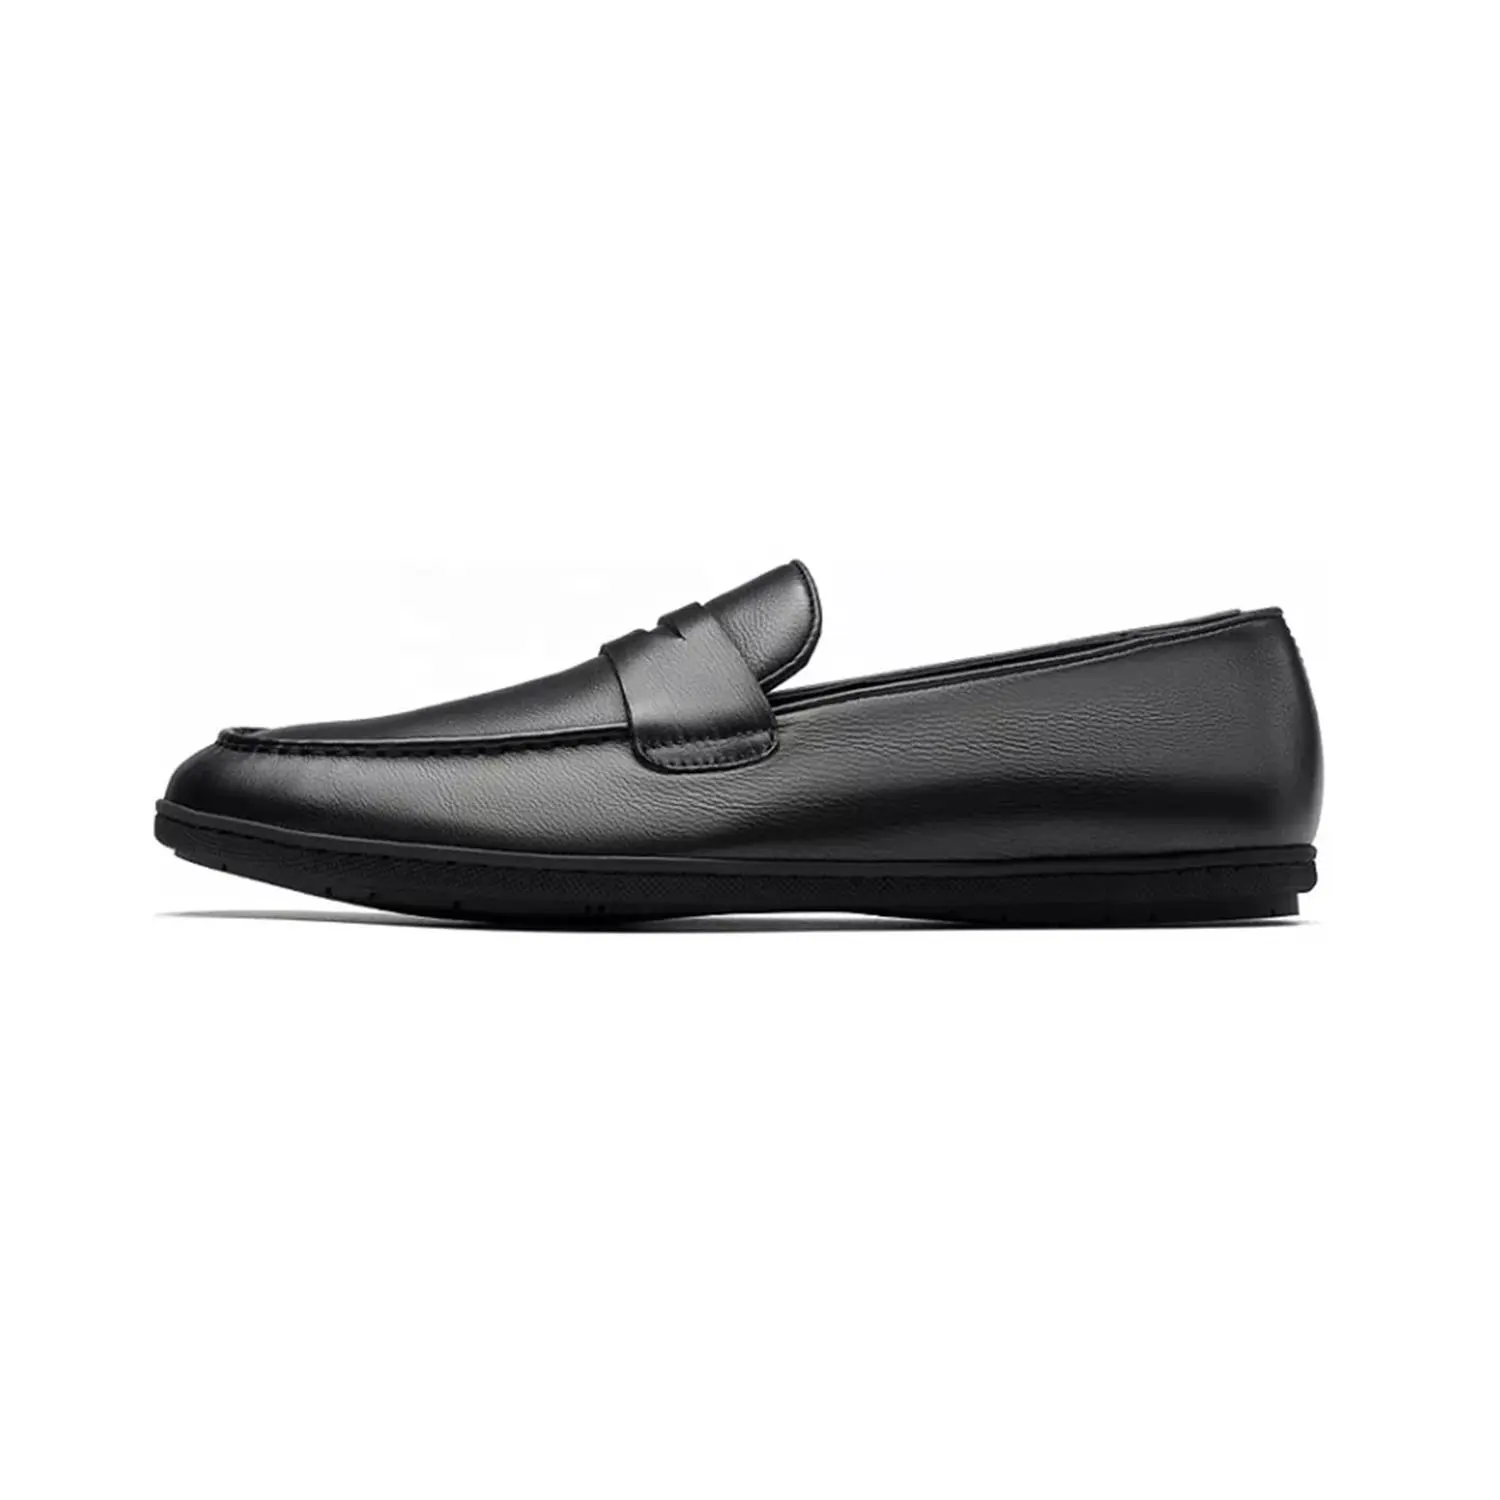 Wholesale Slip on Big Size Penny Shoes Premium Leather Men Loafer Driving Loafer Shoes